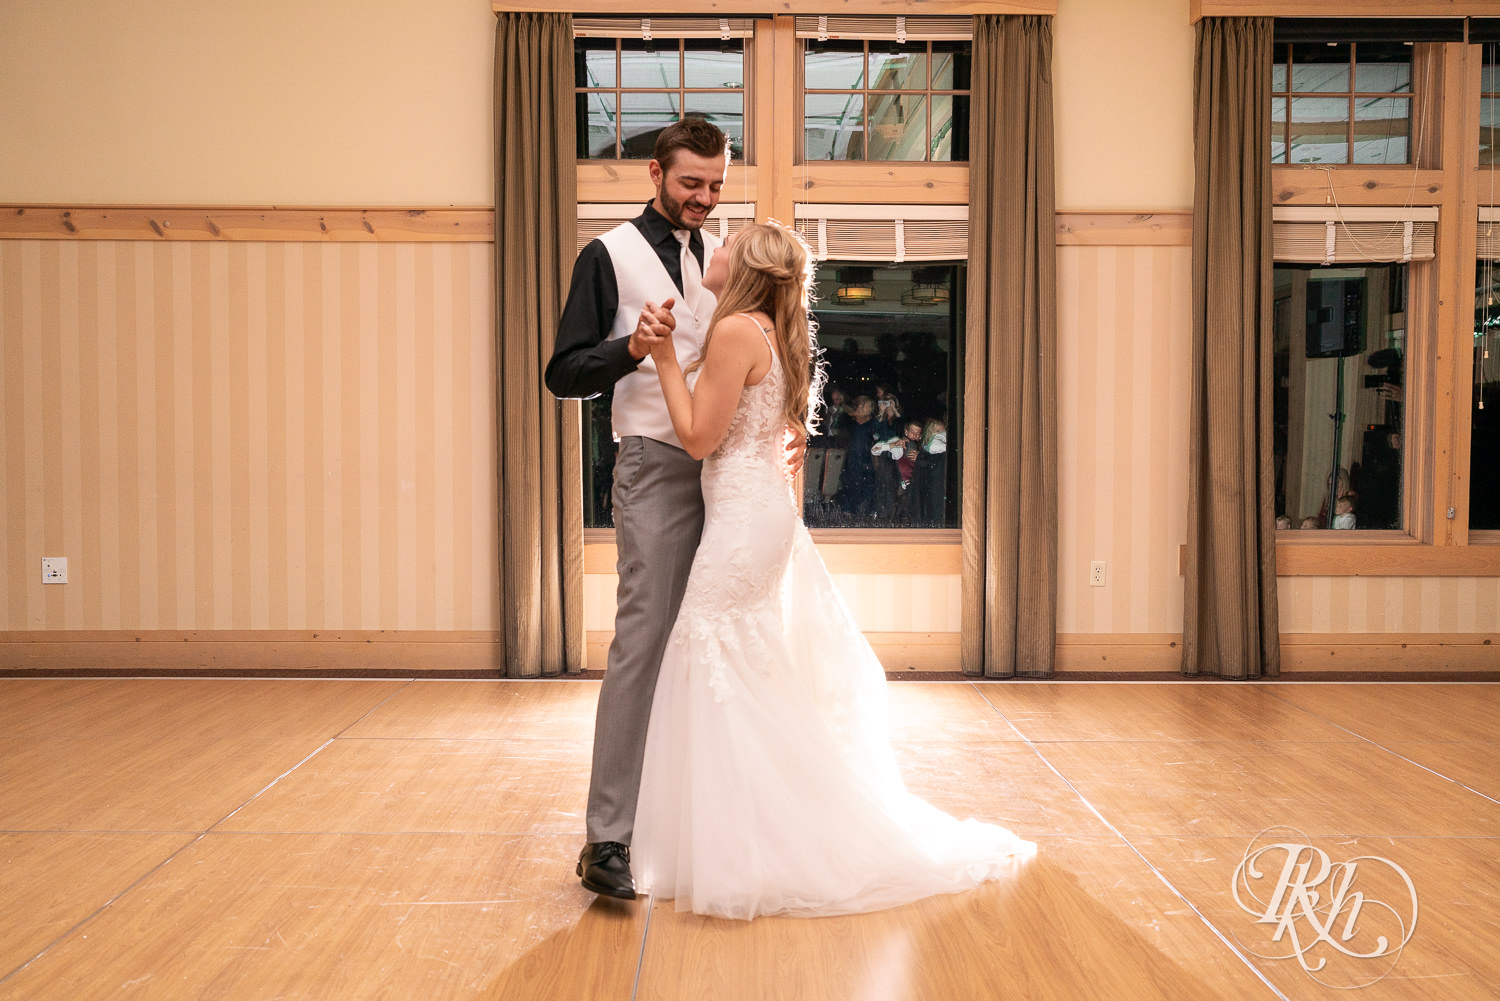 Bride and groom share first dance on wedding day at Bunker Hills Event Center in Coon Rapids, Minnesota.